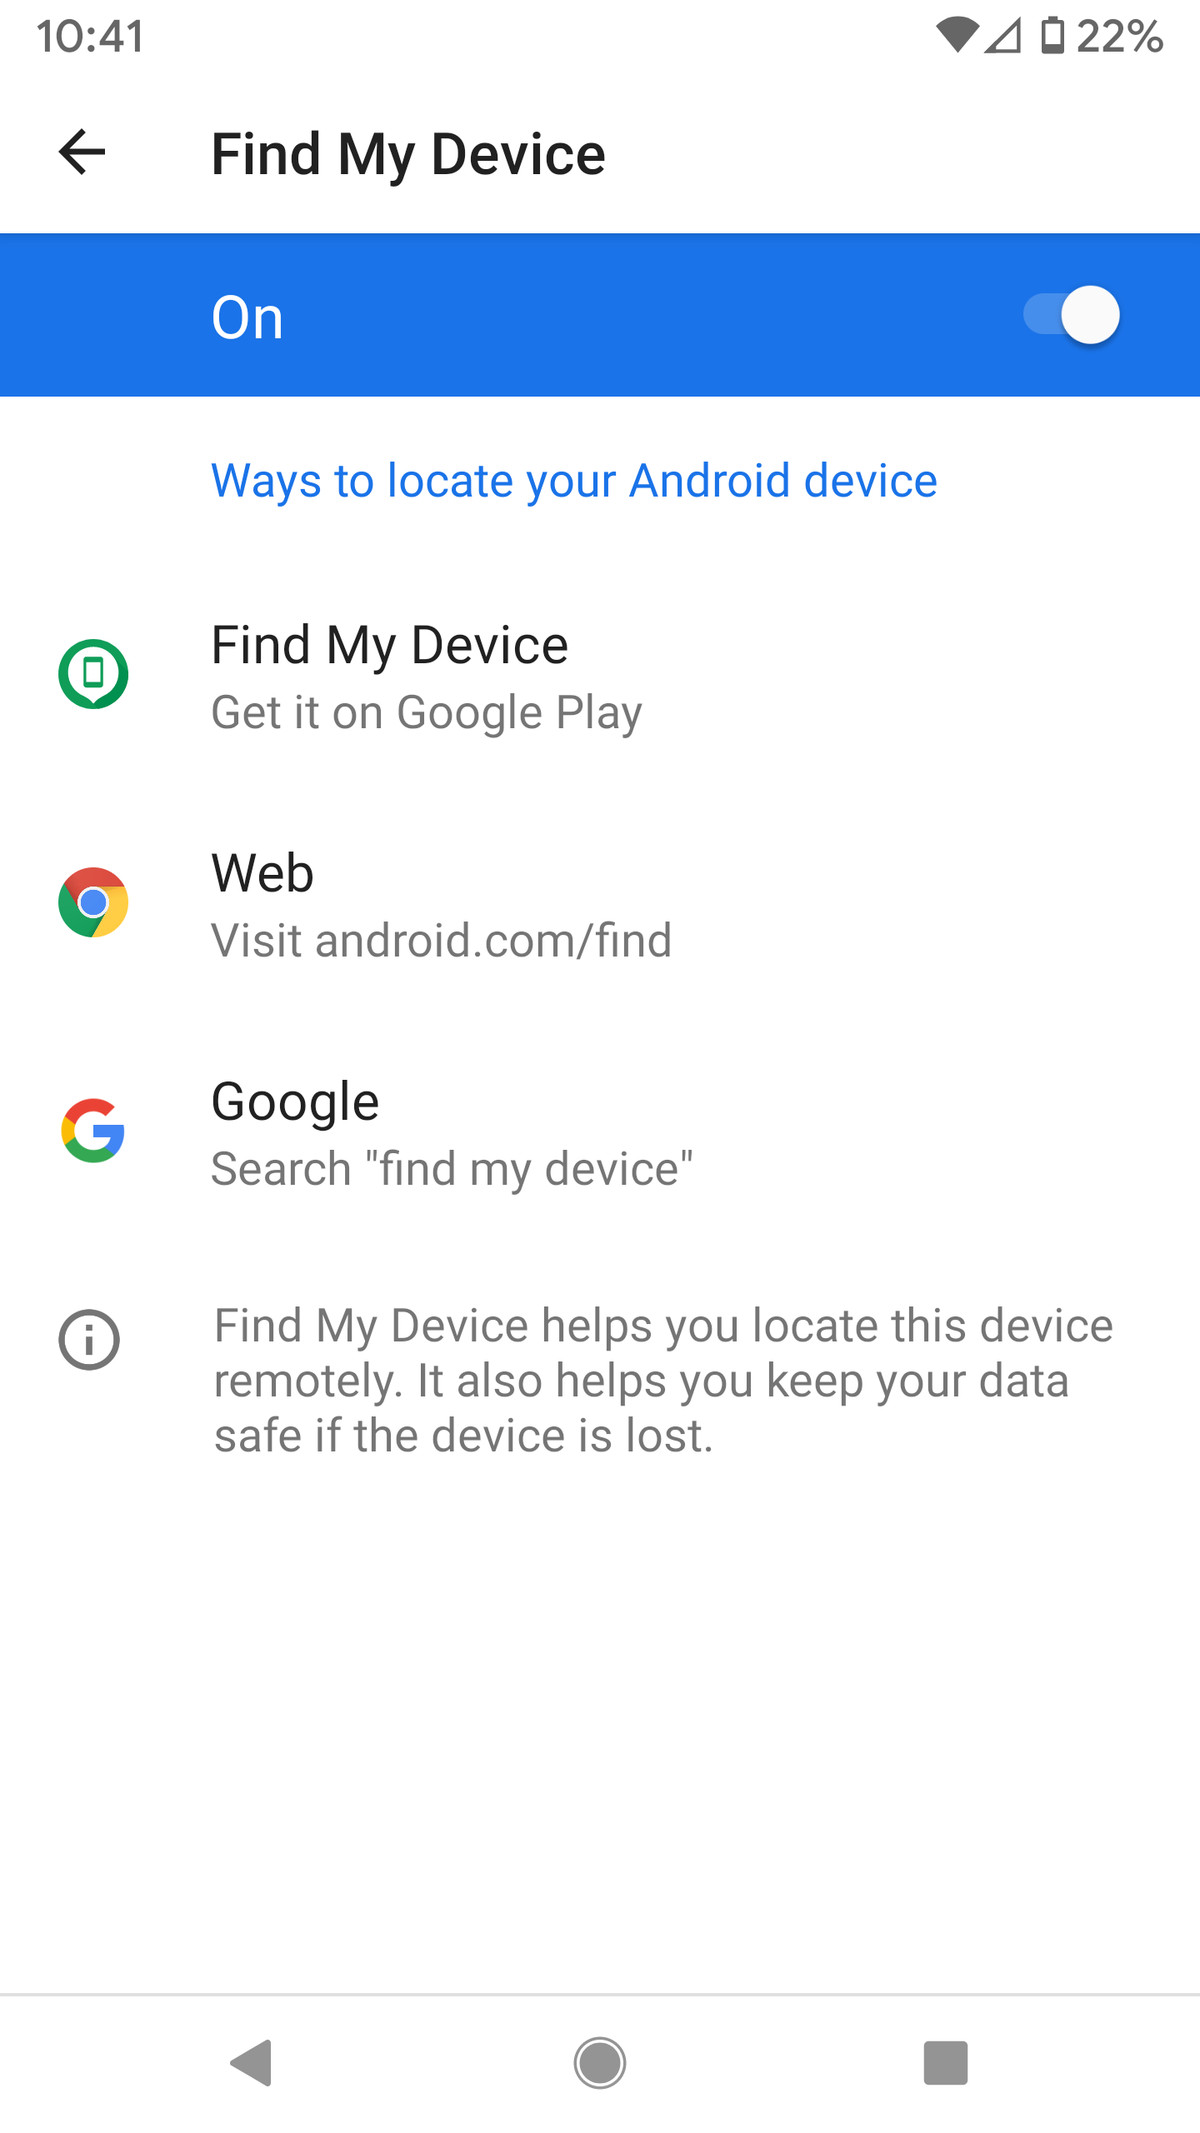 Go to Settings gt; Security gt; Find My Device to make sure it’s enabled.